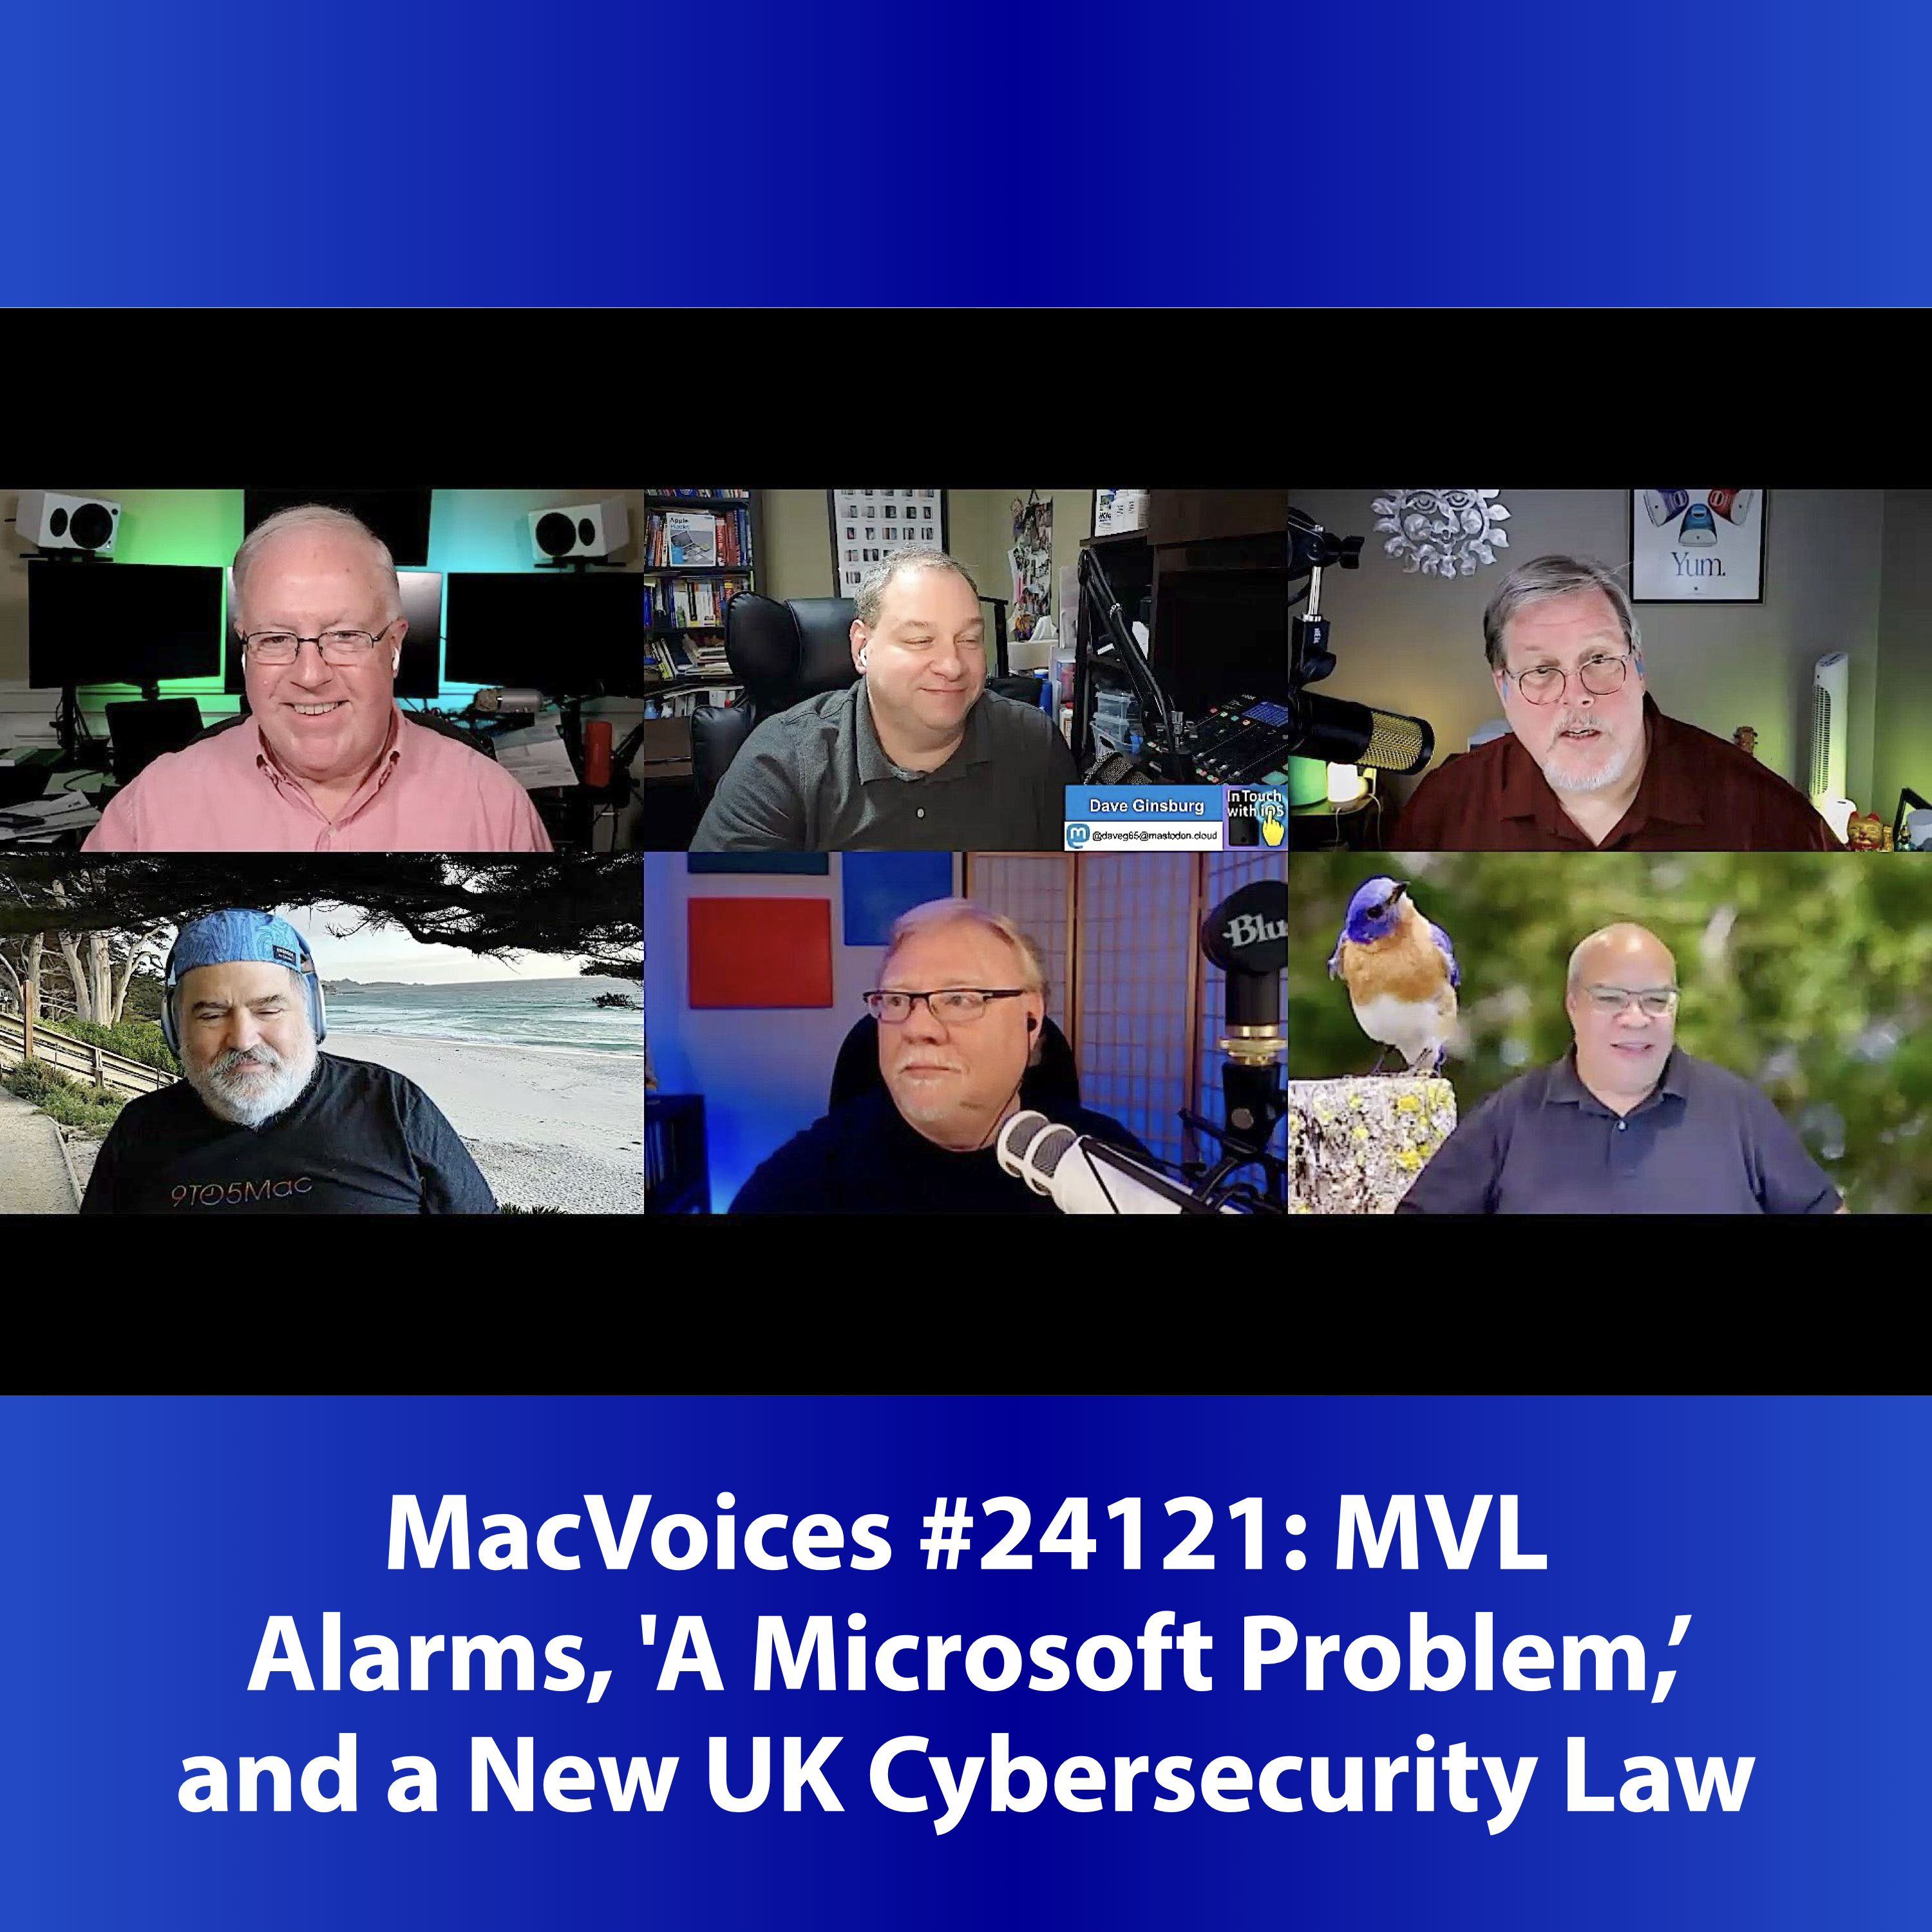 MacVoices #24121: MVL - Alarms, 'A Microsoft Problem," and a New UK Cybersecurity Law